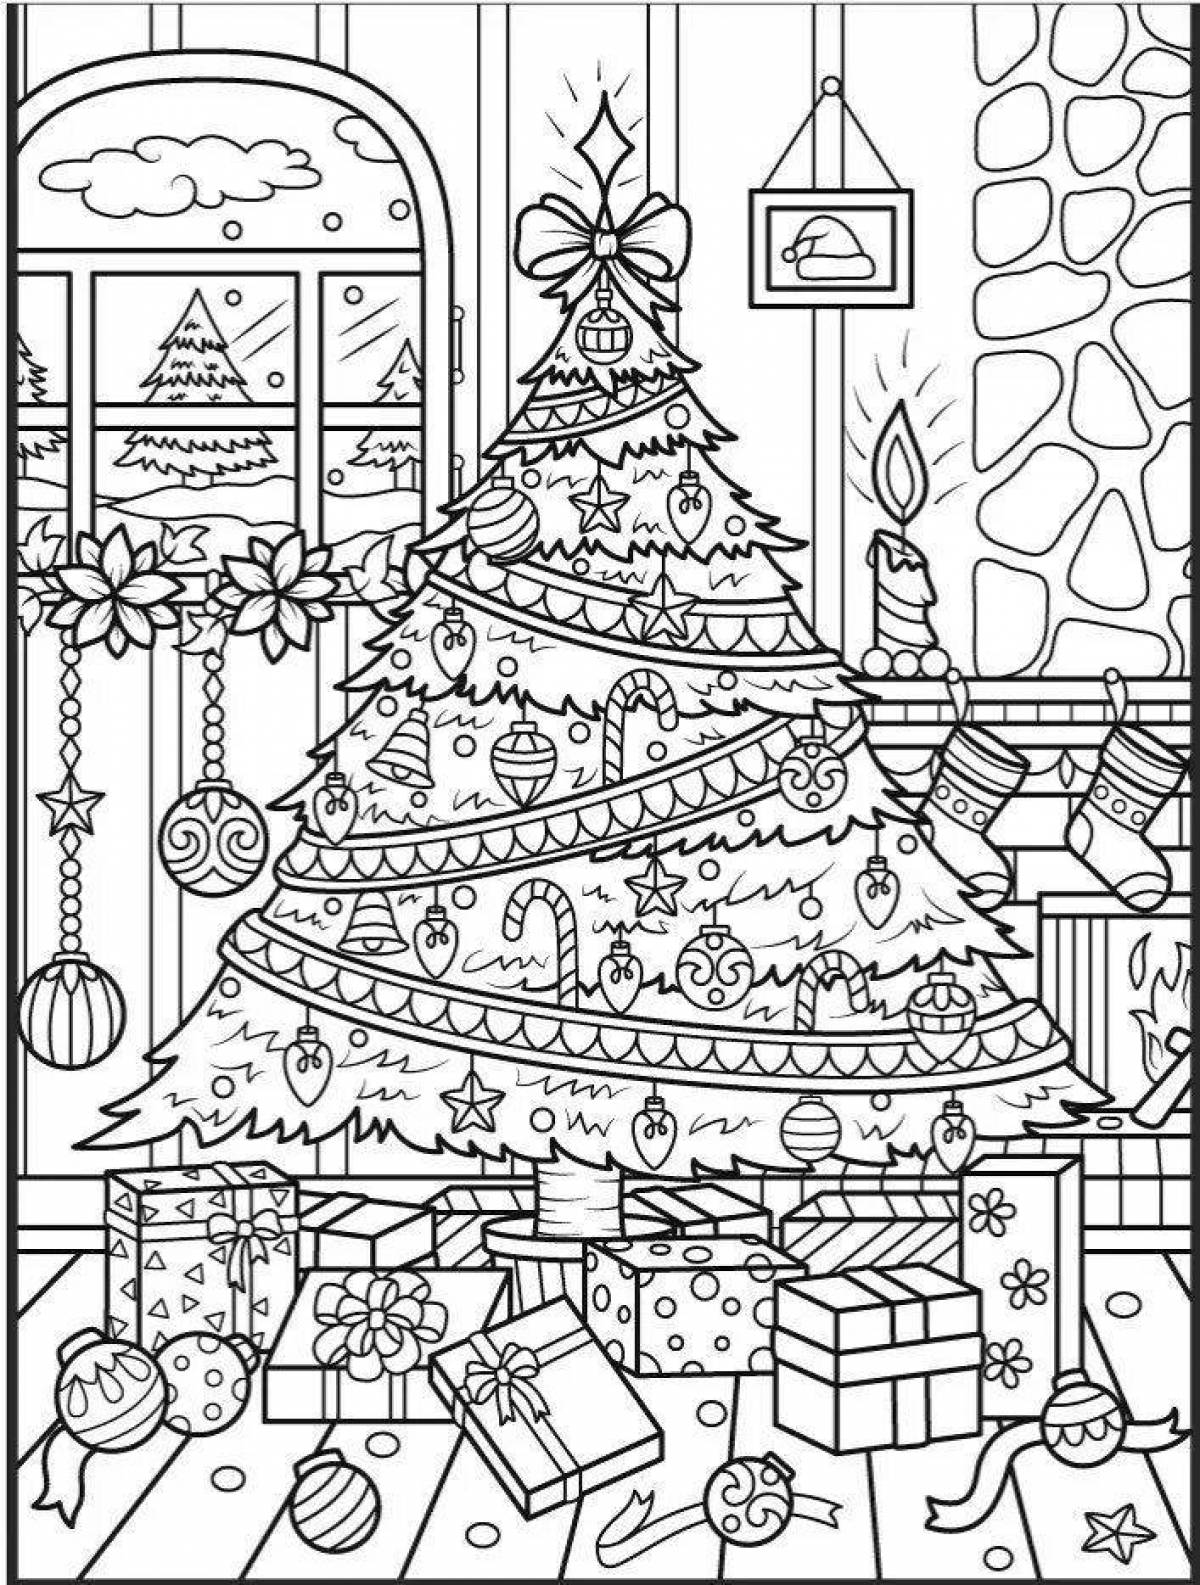 Coloring sublime antistress tree